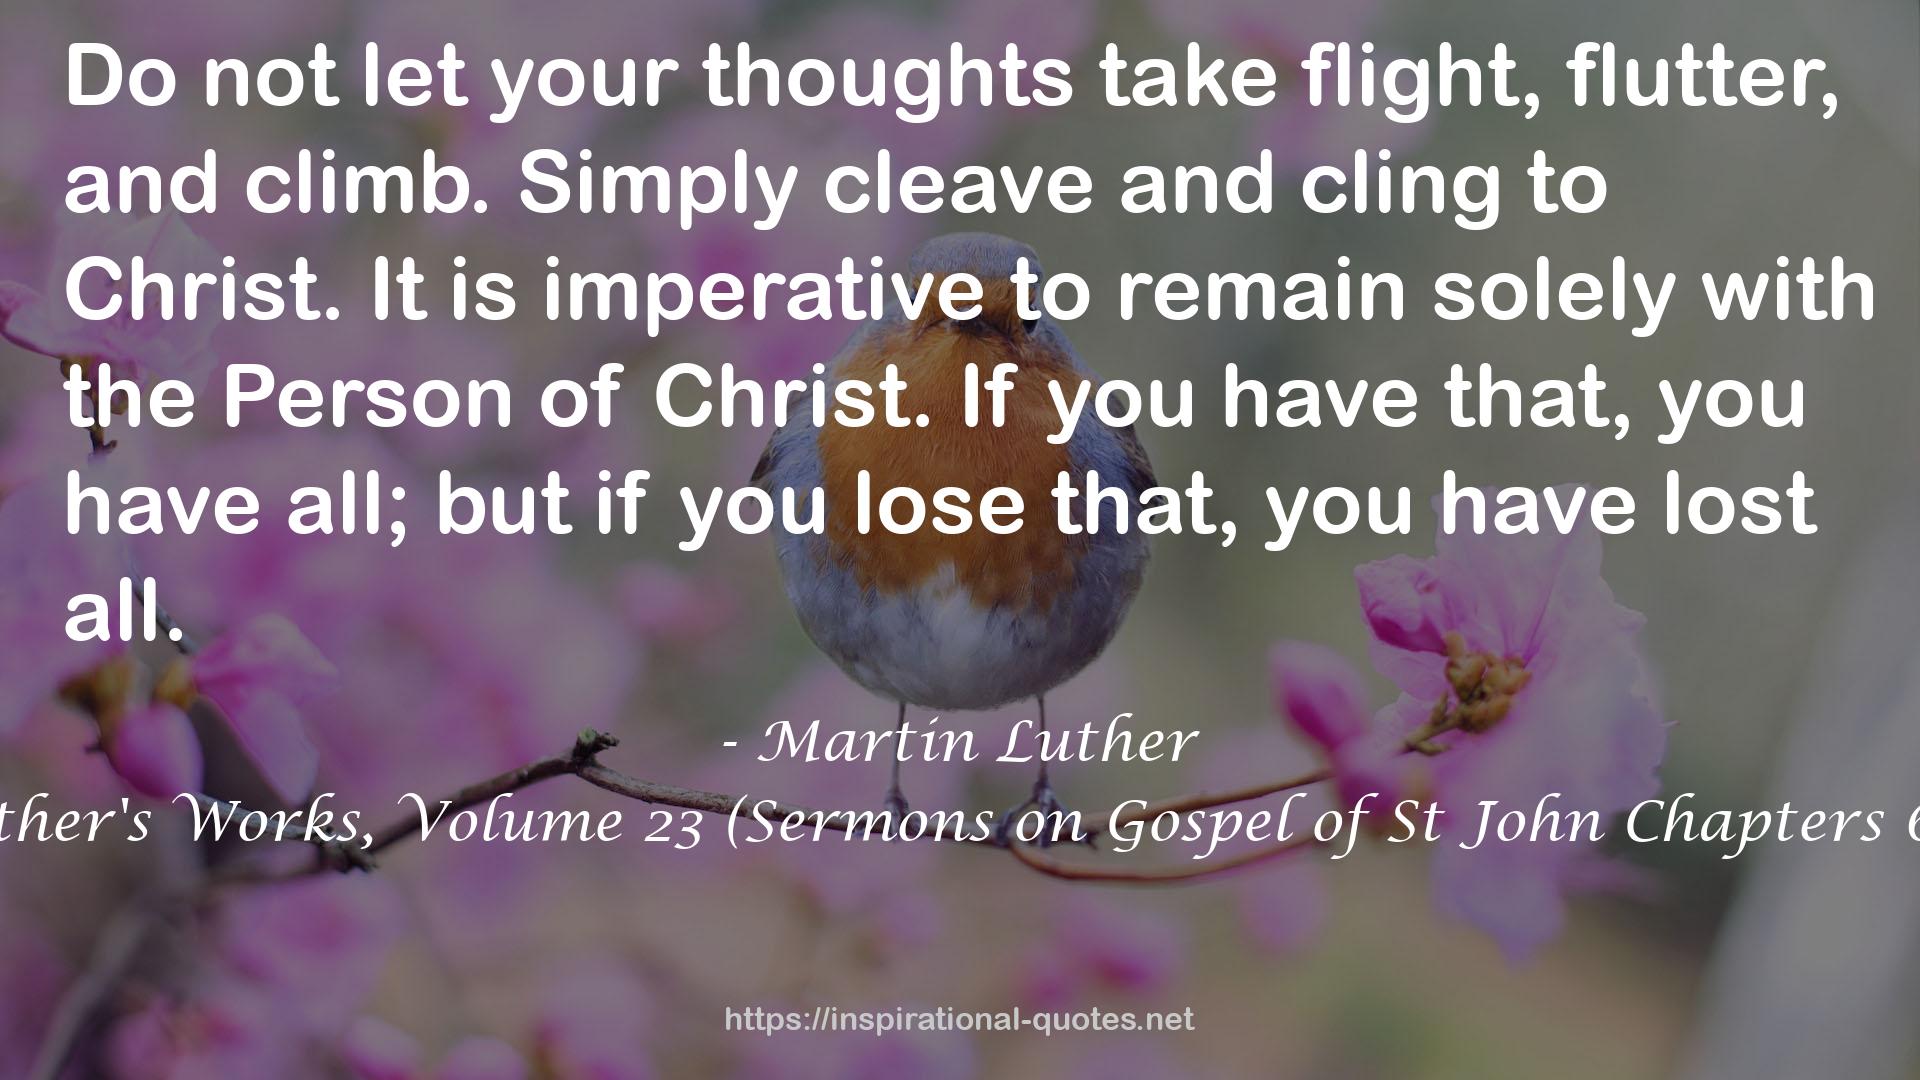 Luther's Works, Volume 23 (Sermons on Gospel of St John Chapters 6-8) QUOTES